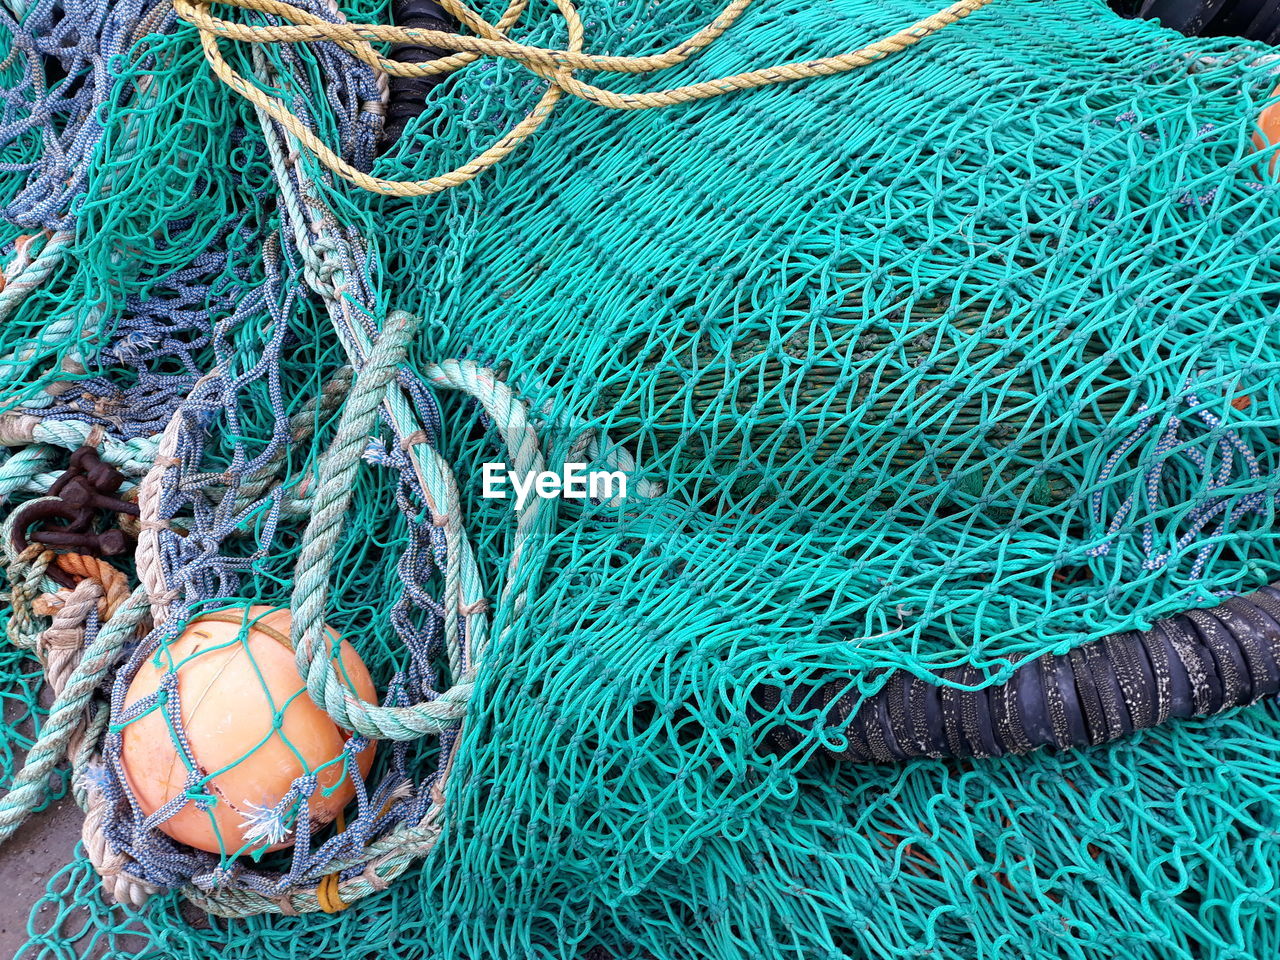 HIGH ANGLE VIEW OF FISHING NET AT BLUE ROPE